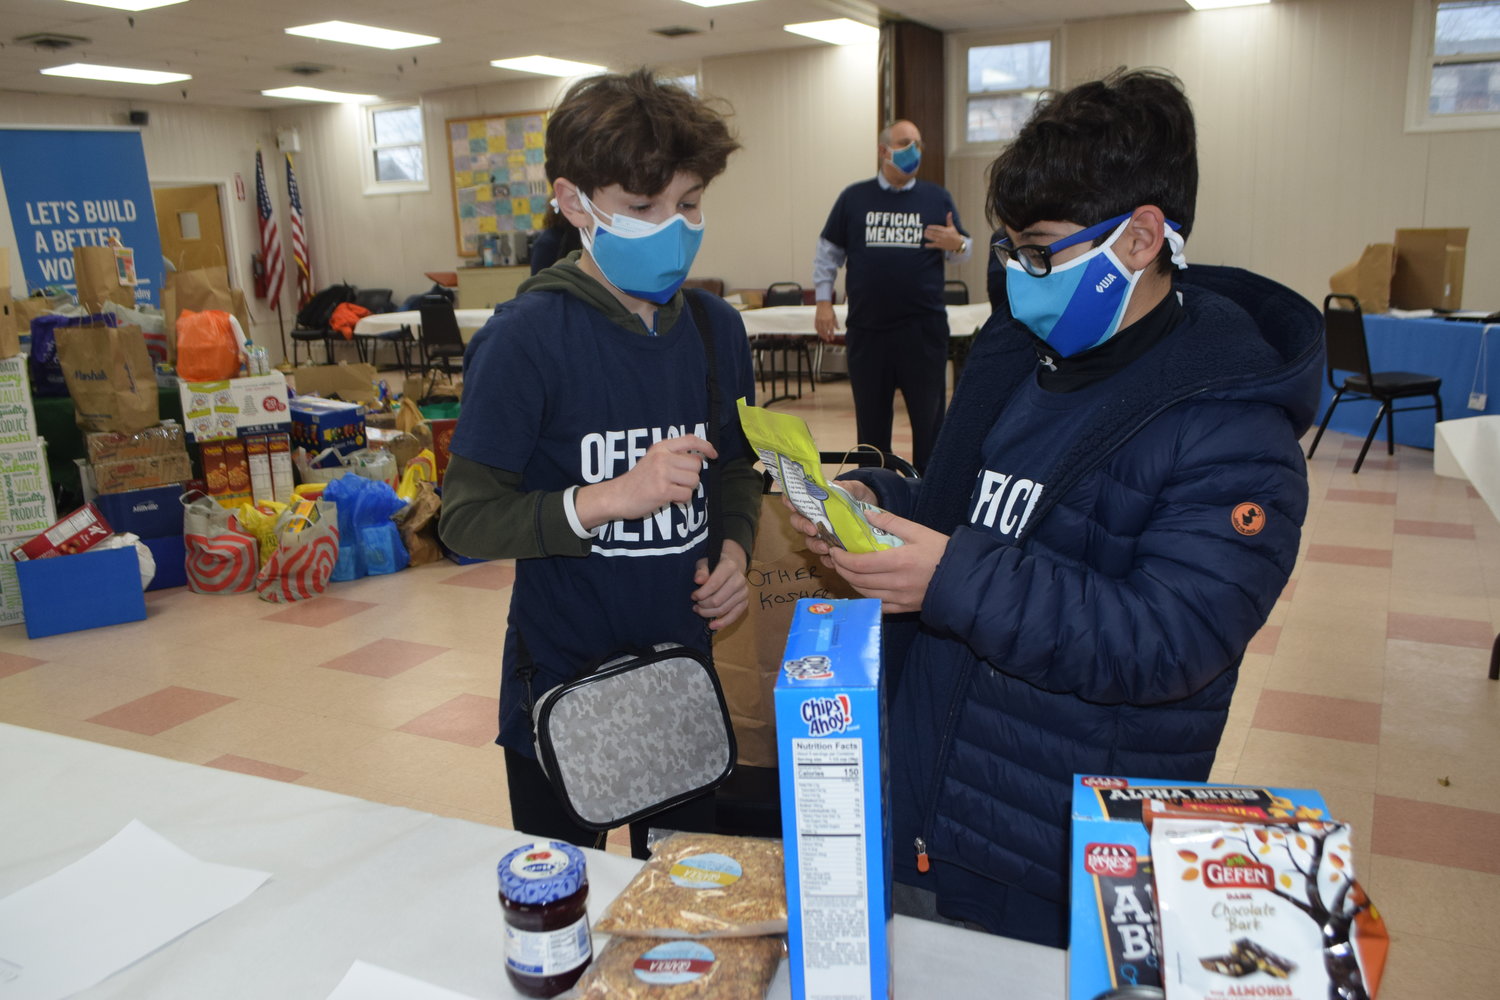 Woodmere Middle School sixth-graders Jacob Tenenbaum, left, and Aaron Kahn, sorted items at the JCC’s food drive.